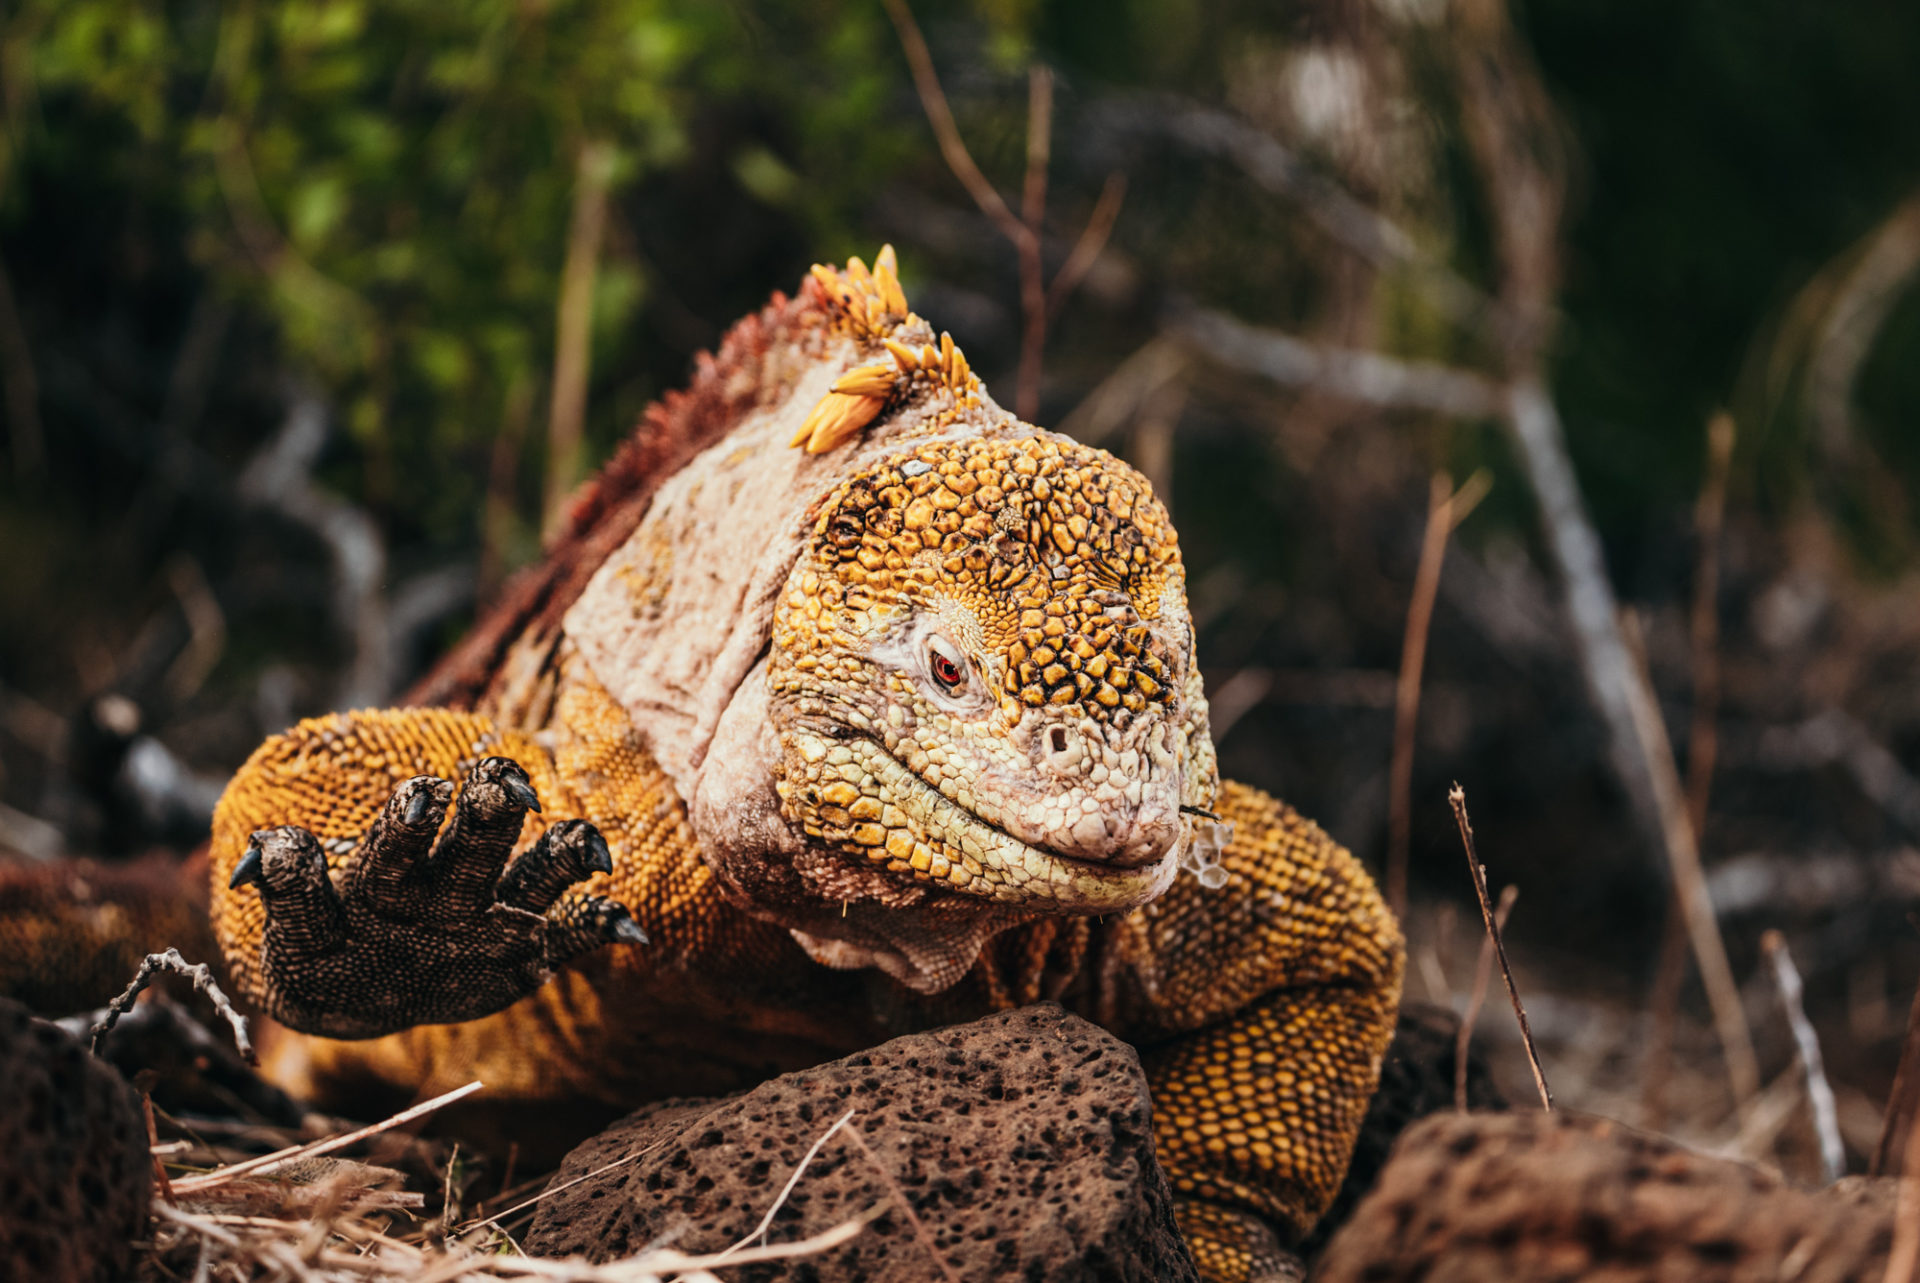 18 Animals of the Galapagos Islands: A Photo Essay | Drink Tea & Travel